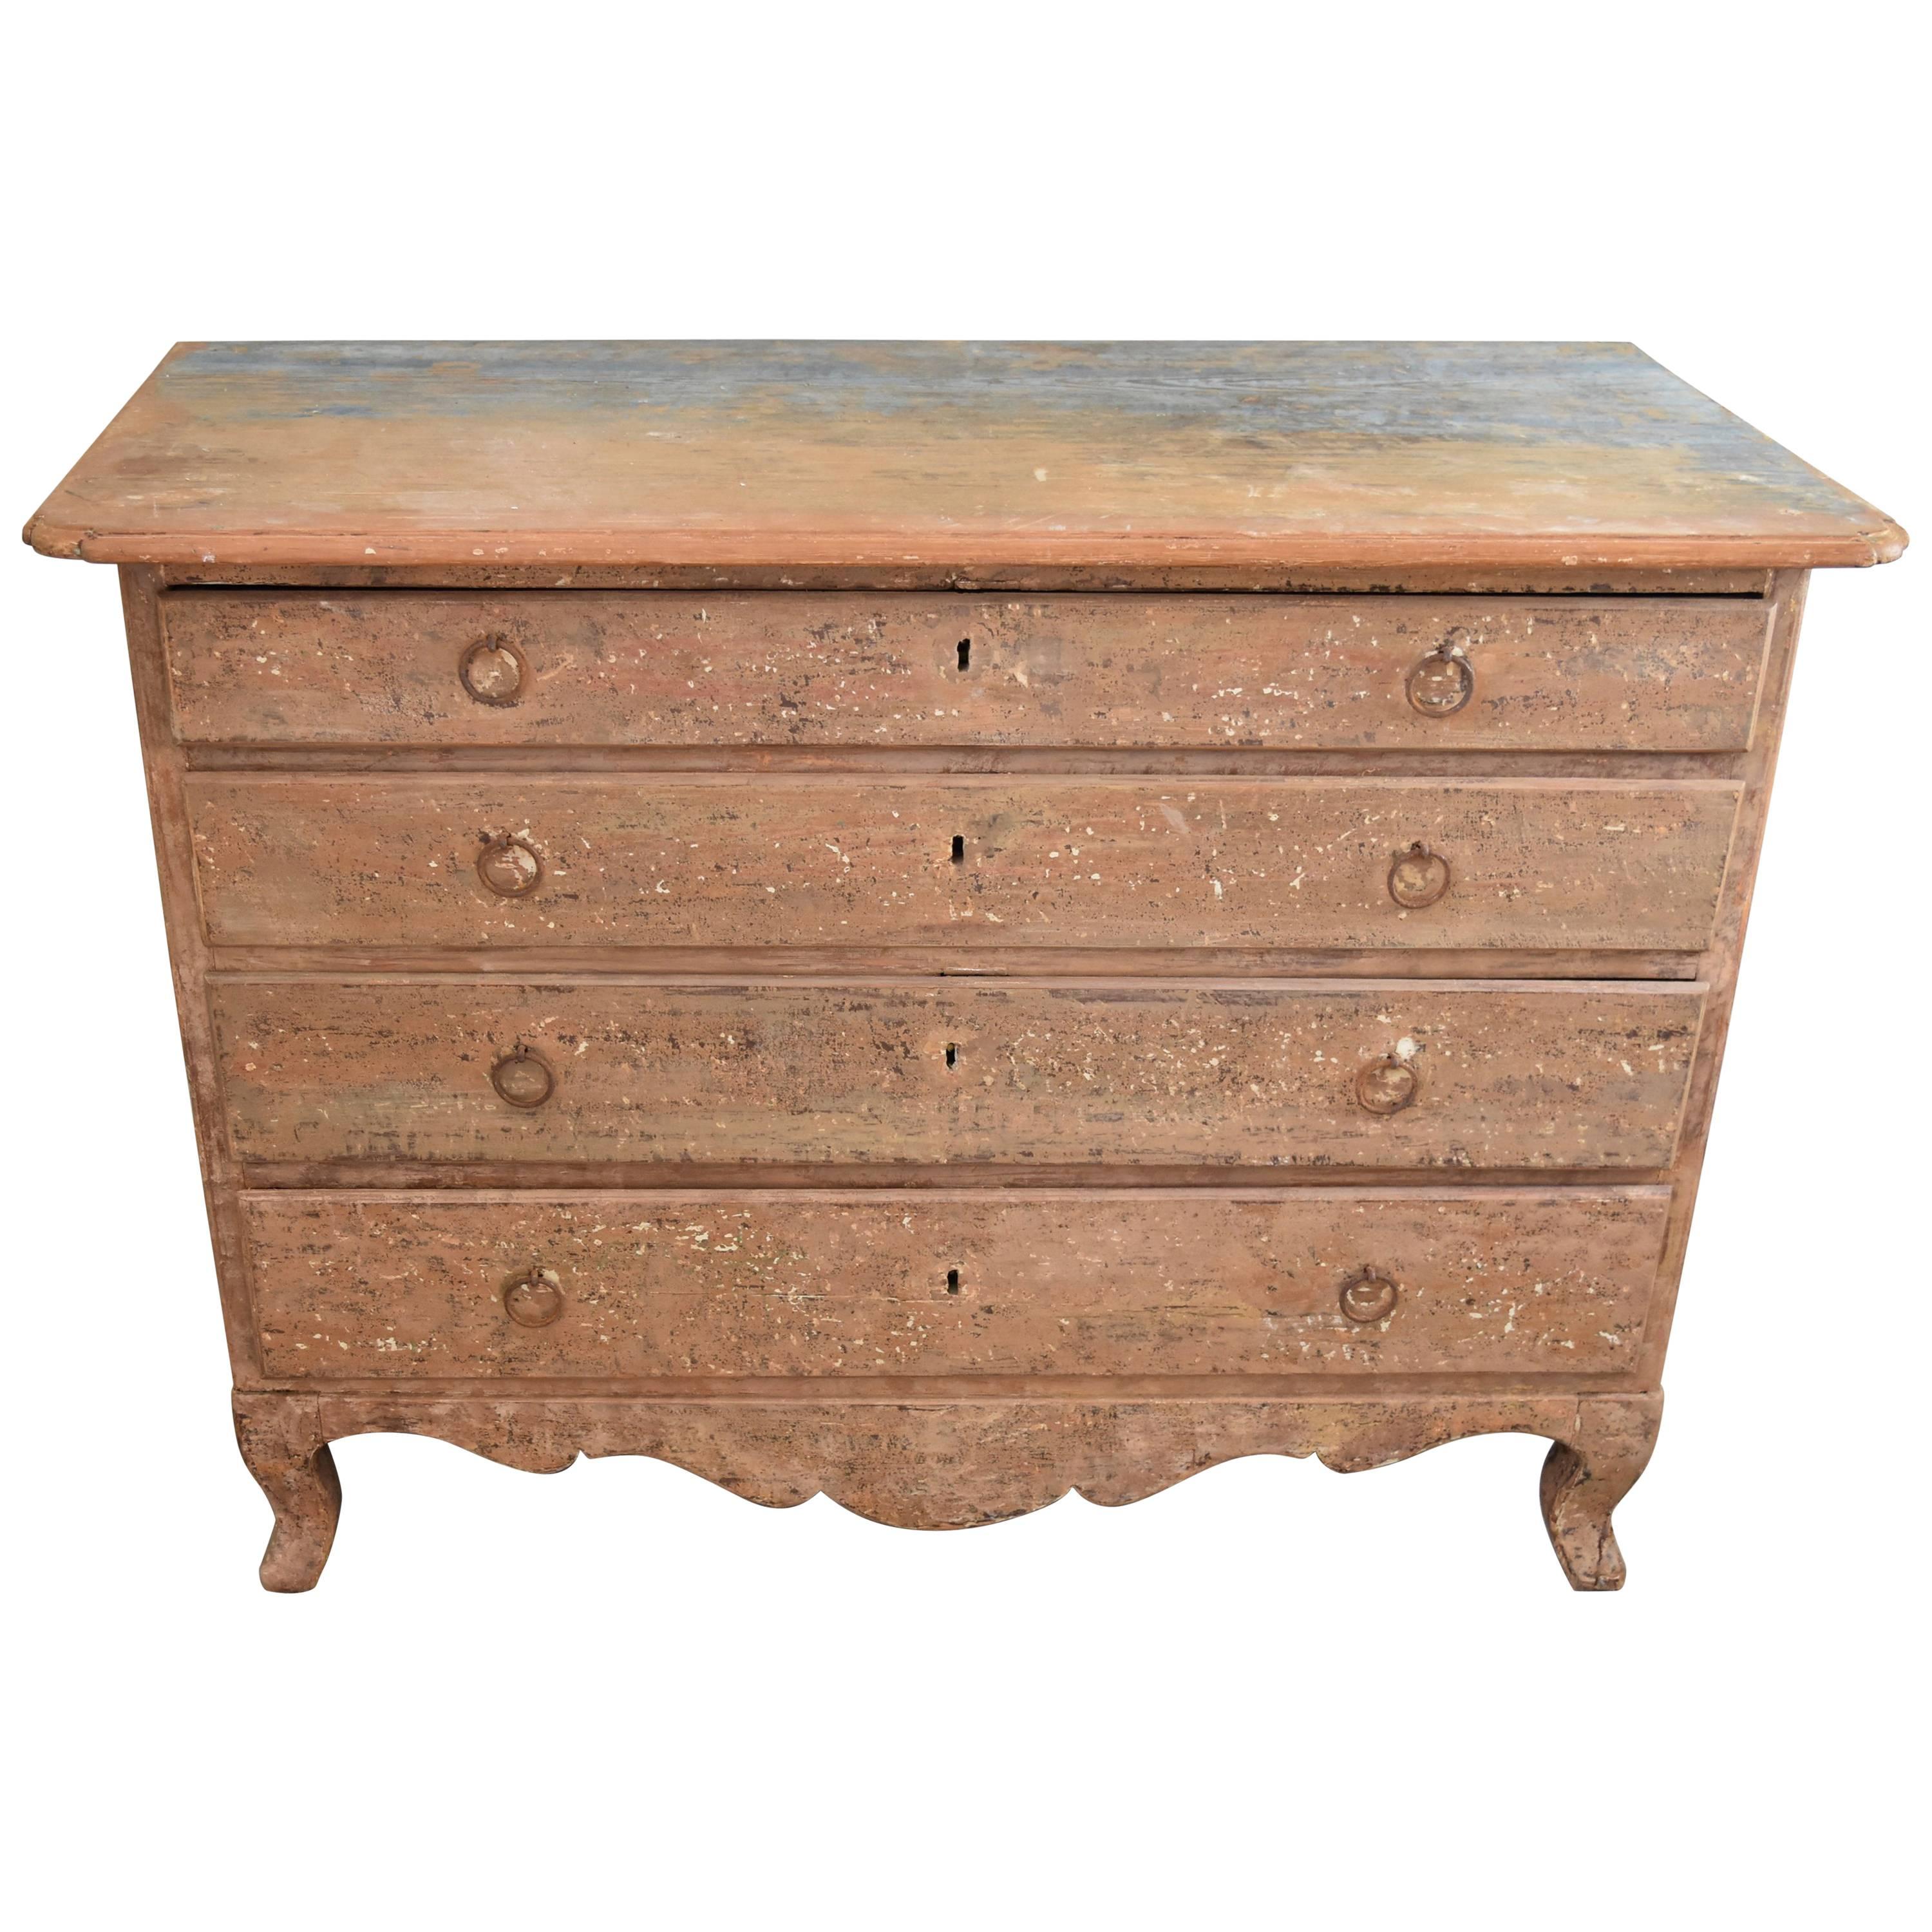 Late 19th Century Swedish Rococo Four-Drawer Original Painted Chest